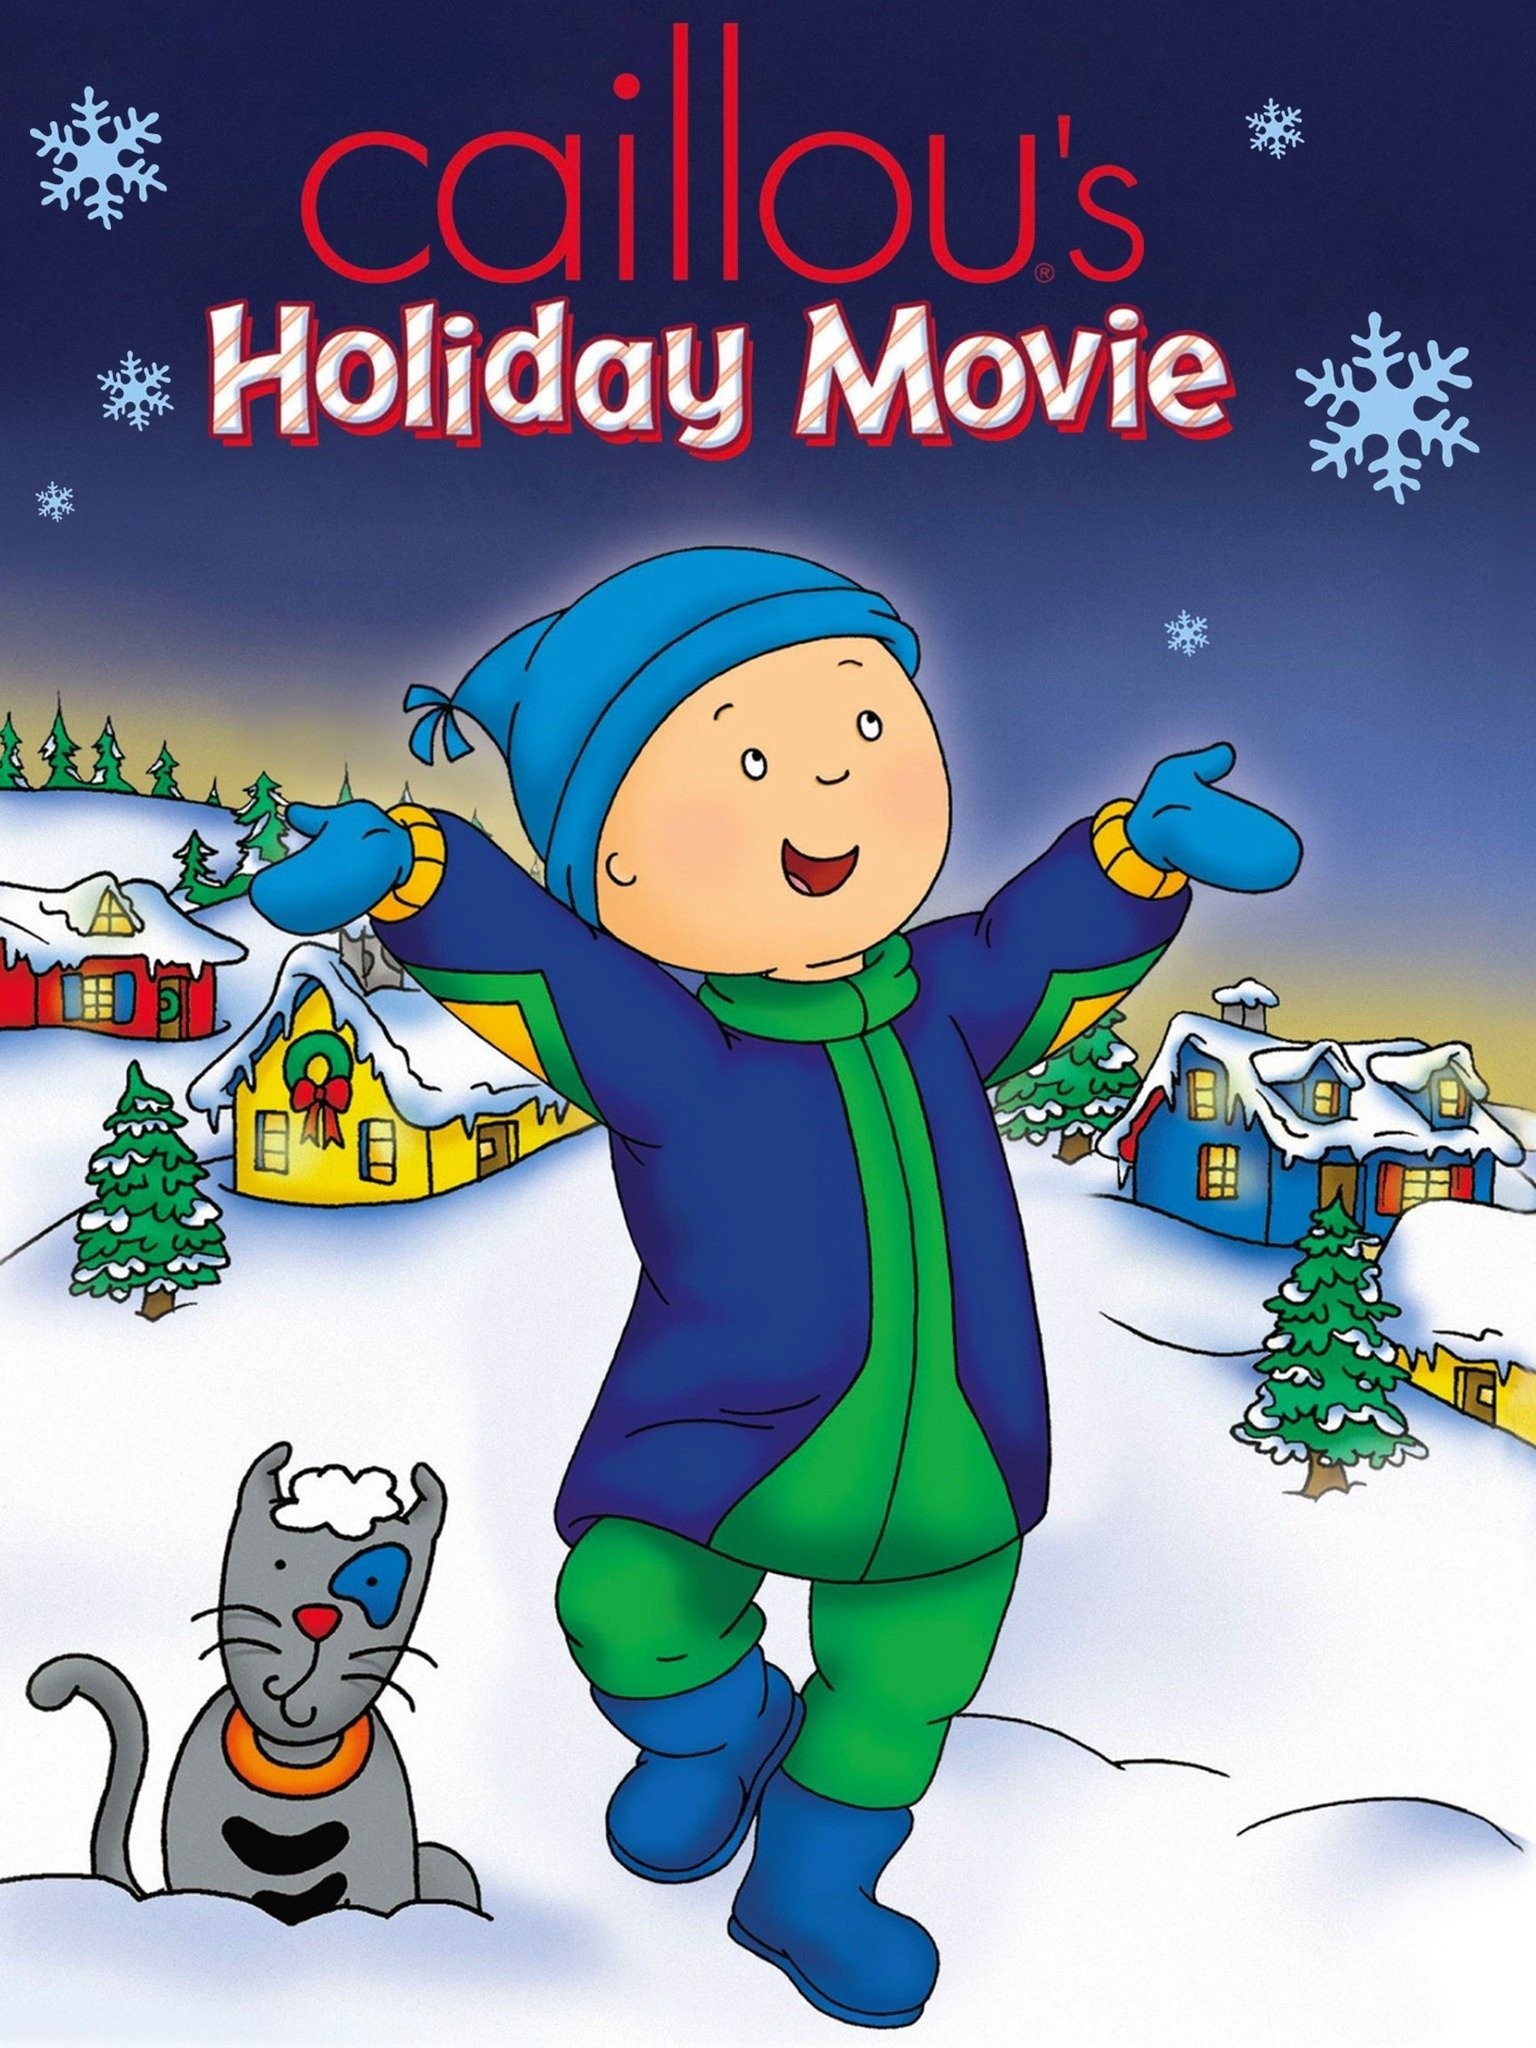 I'm getting ready! Every year I watch the caillou movie. It's about them  doing Christmas for 12 days, and I watch each part, day by day! I've done  this for like 10